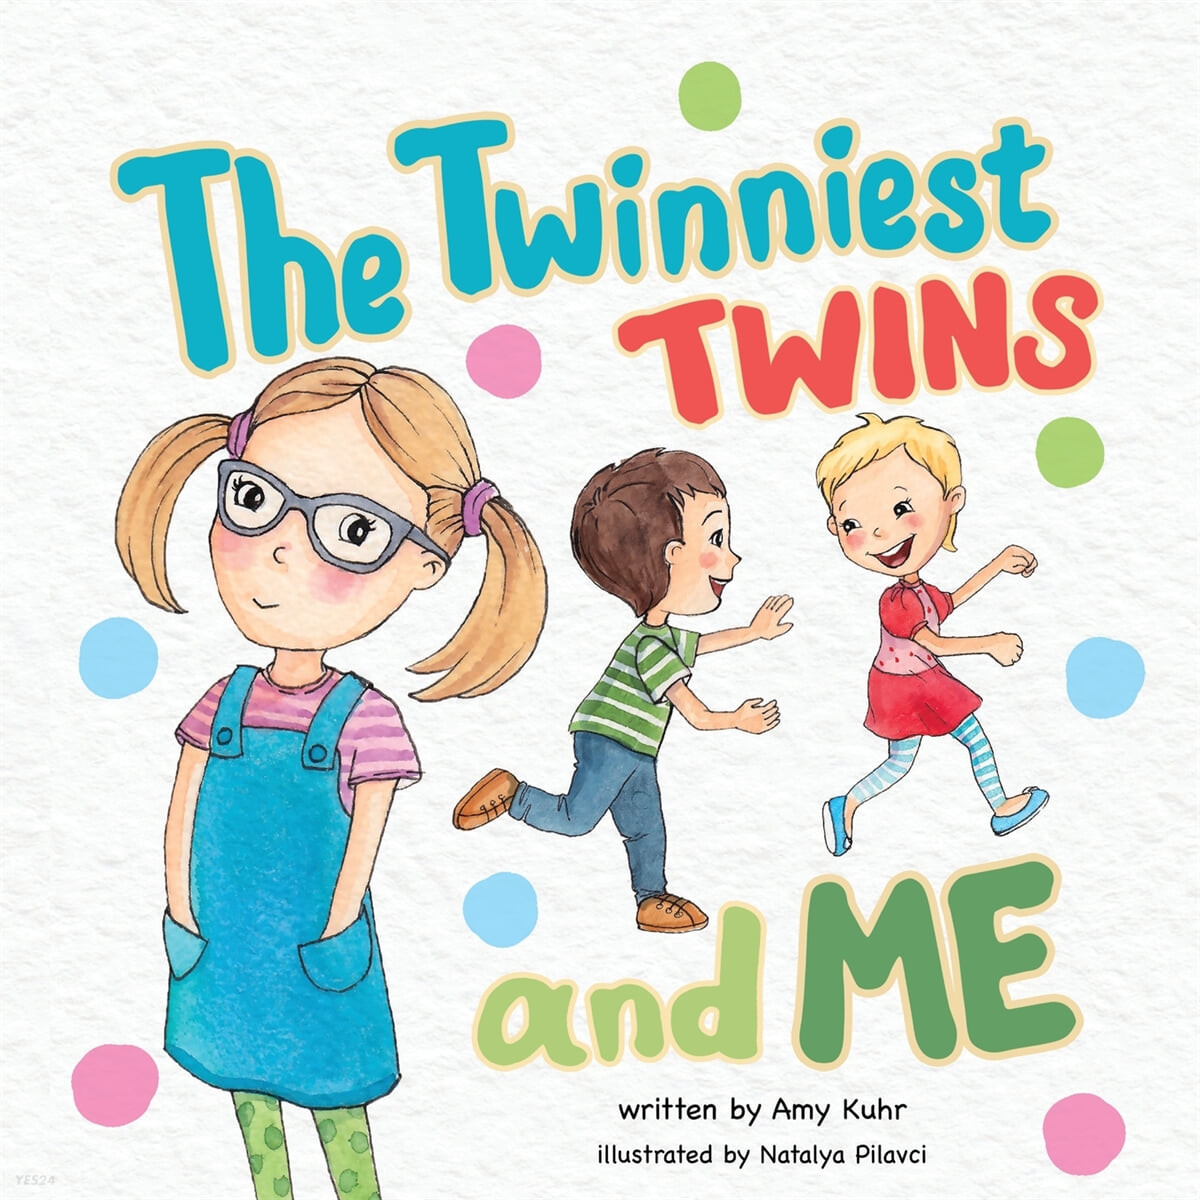 (The)twinniest twins and me